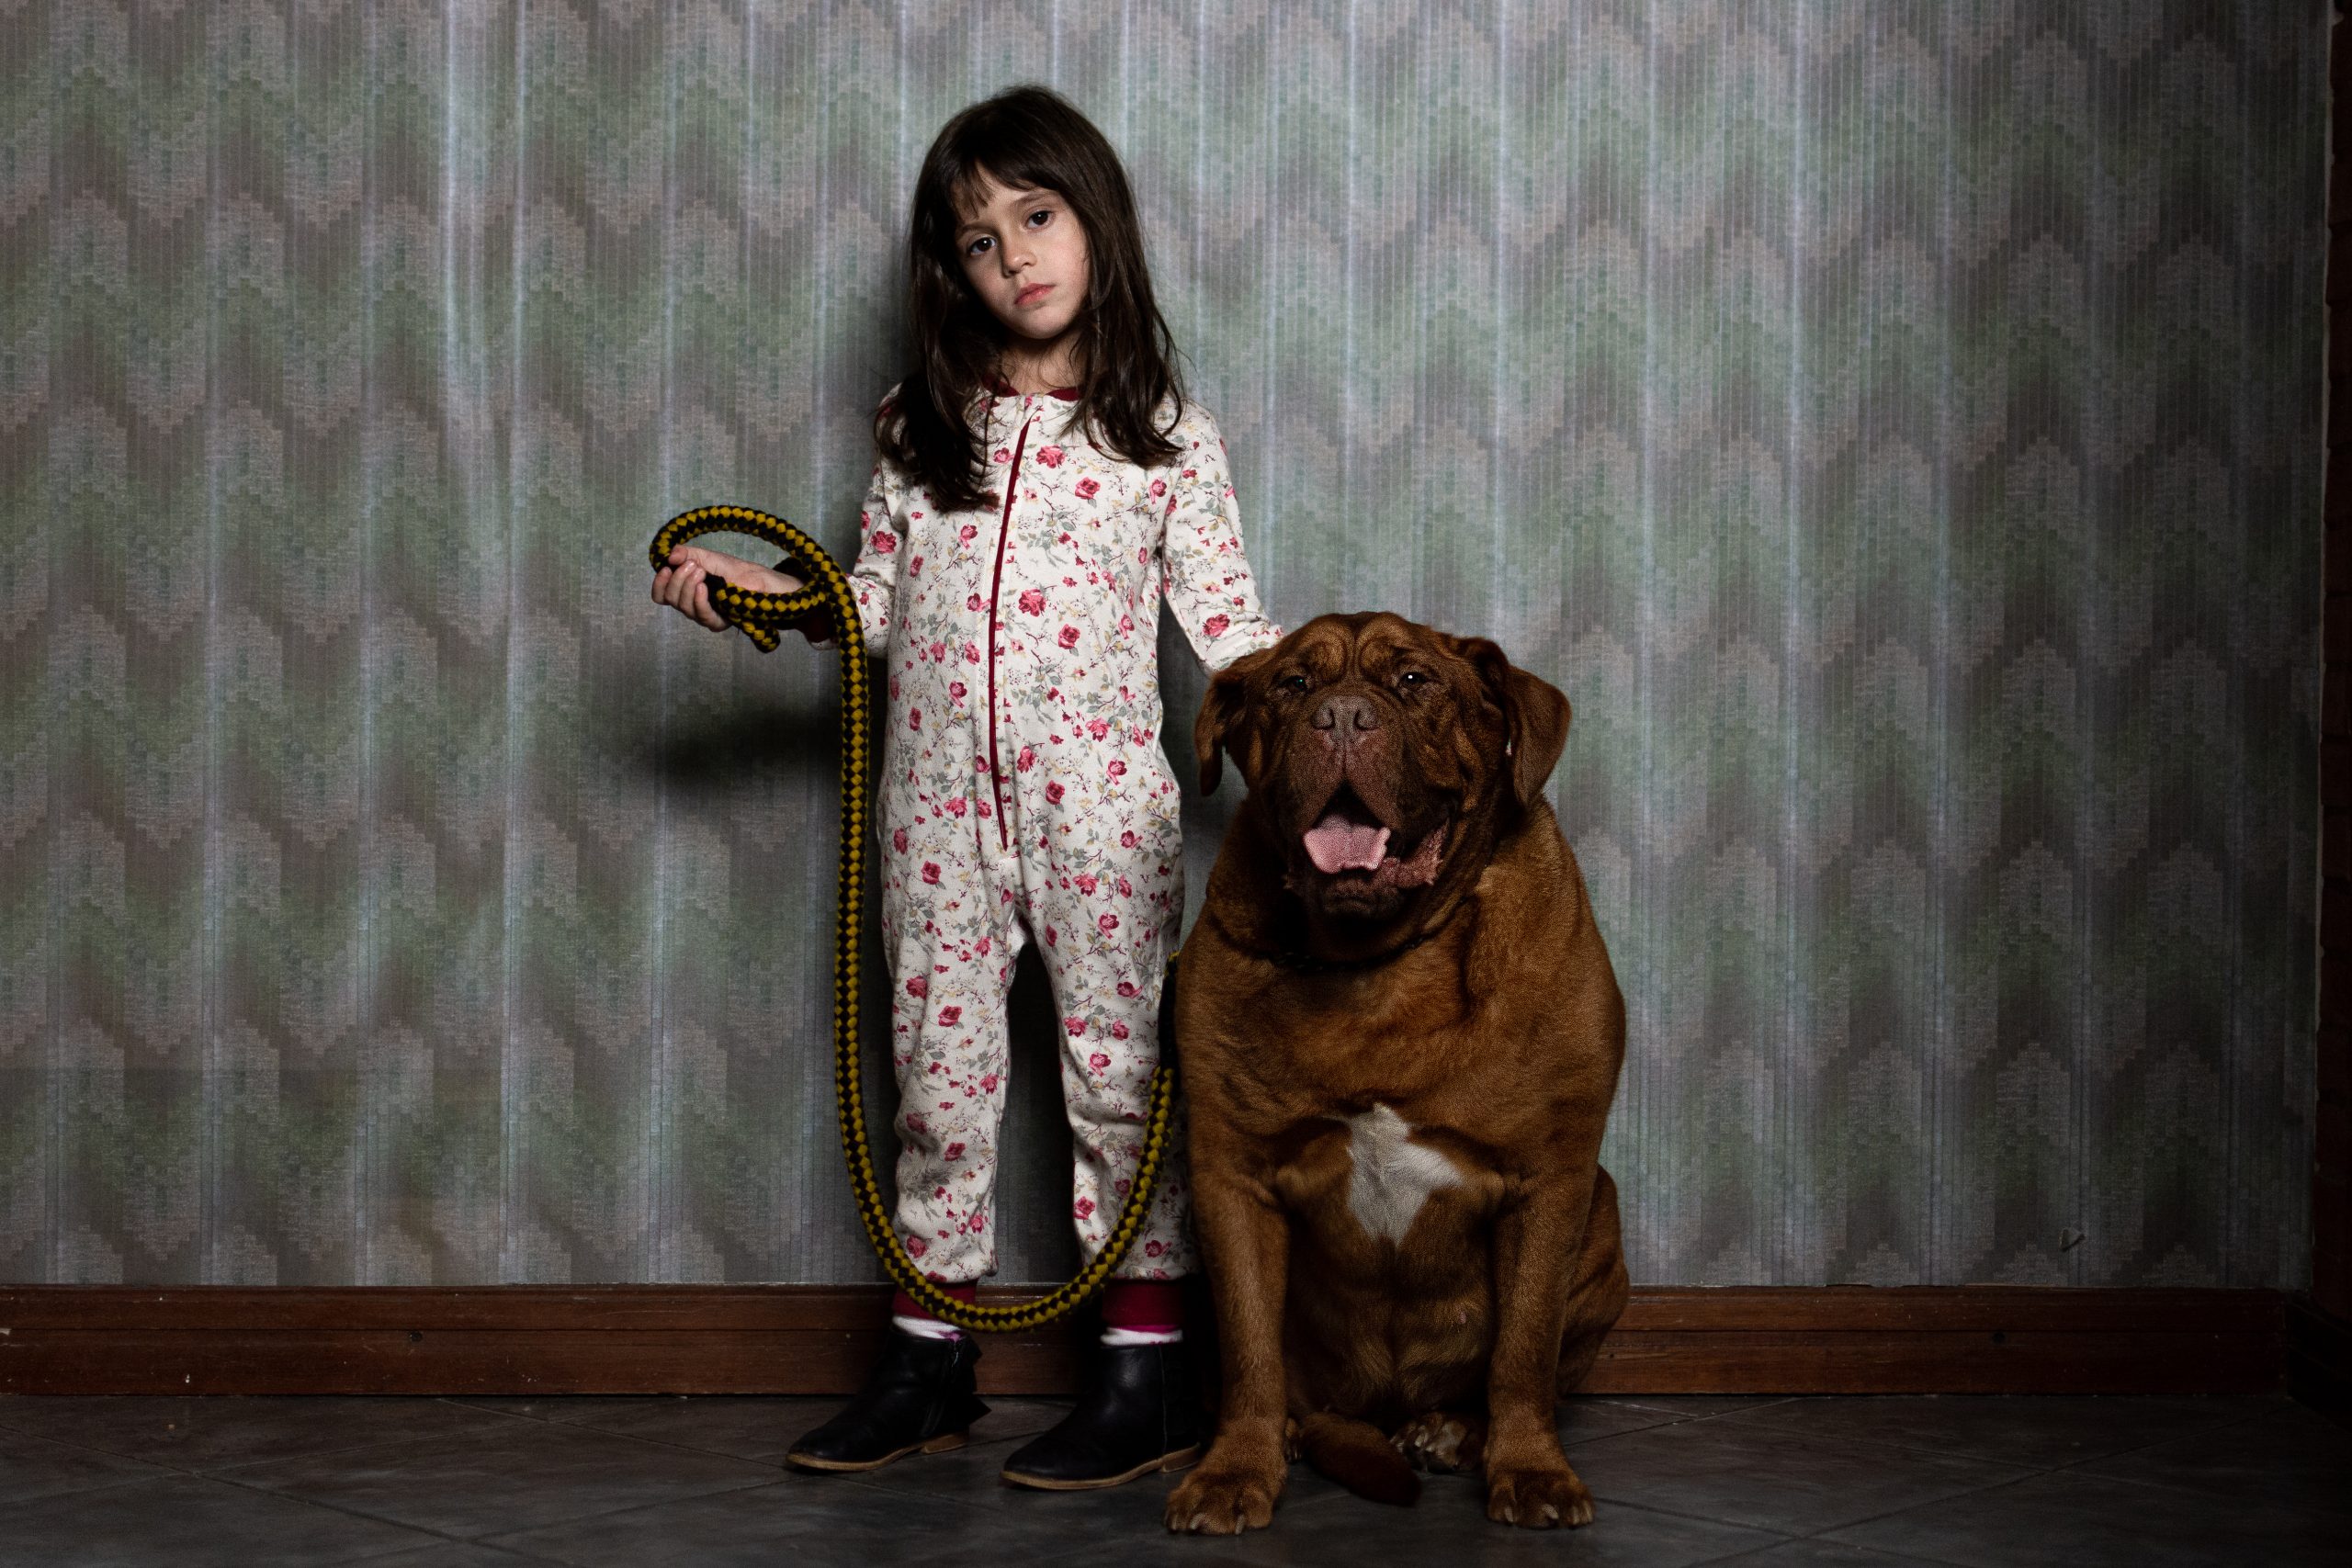 A photo of a young child in pyjamas standing next to a large brown dog. Demian Rugna’s WHEN EVIL LURKS. Courtesy of Shudder and IFC Films. A Shudder and IFC Films release.